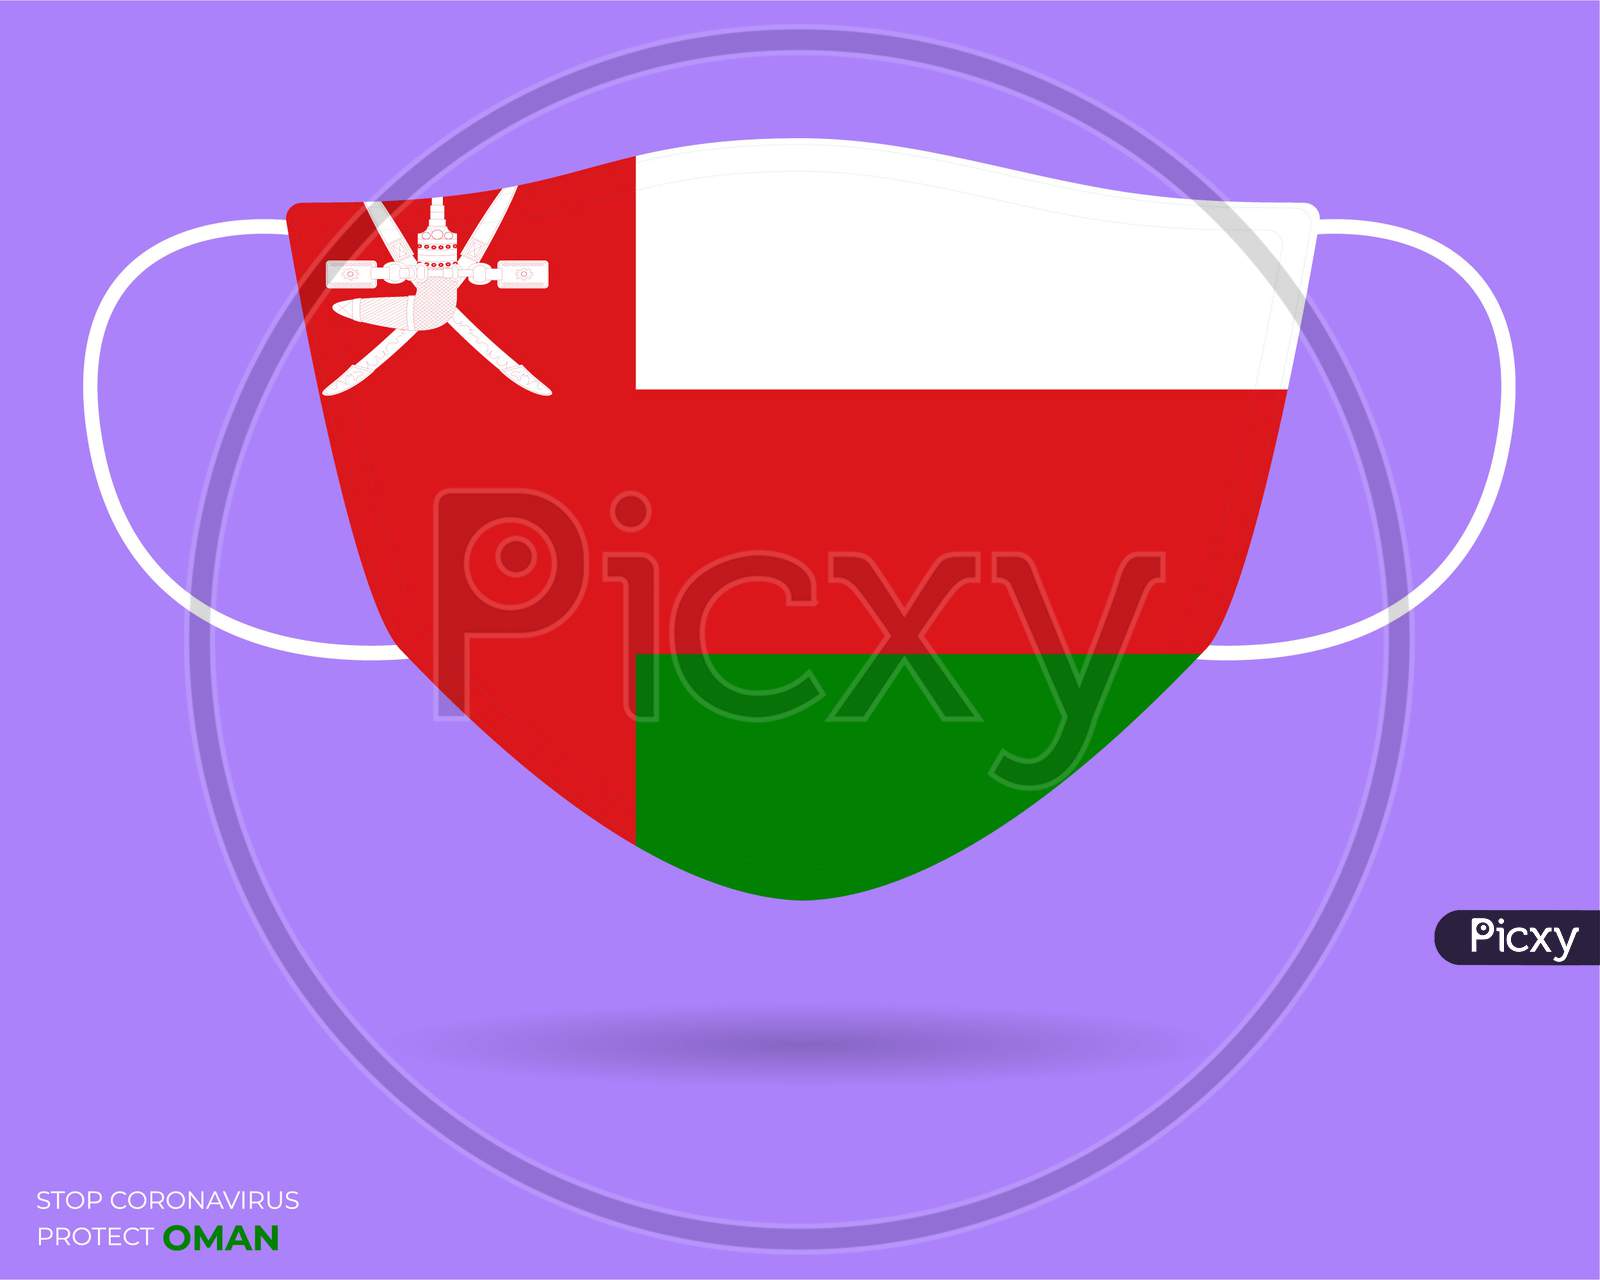 Coronavirus In Oman. Graphic Vector Of Surgical Mask With Oman Flag. (2019-Ncov Or Covid-19). Medical Face Mask As Concept Of Coronavirus Quarantine.Coronavirus Outbreak. Use For Printing Eps File.